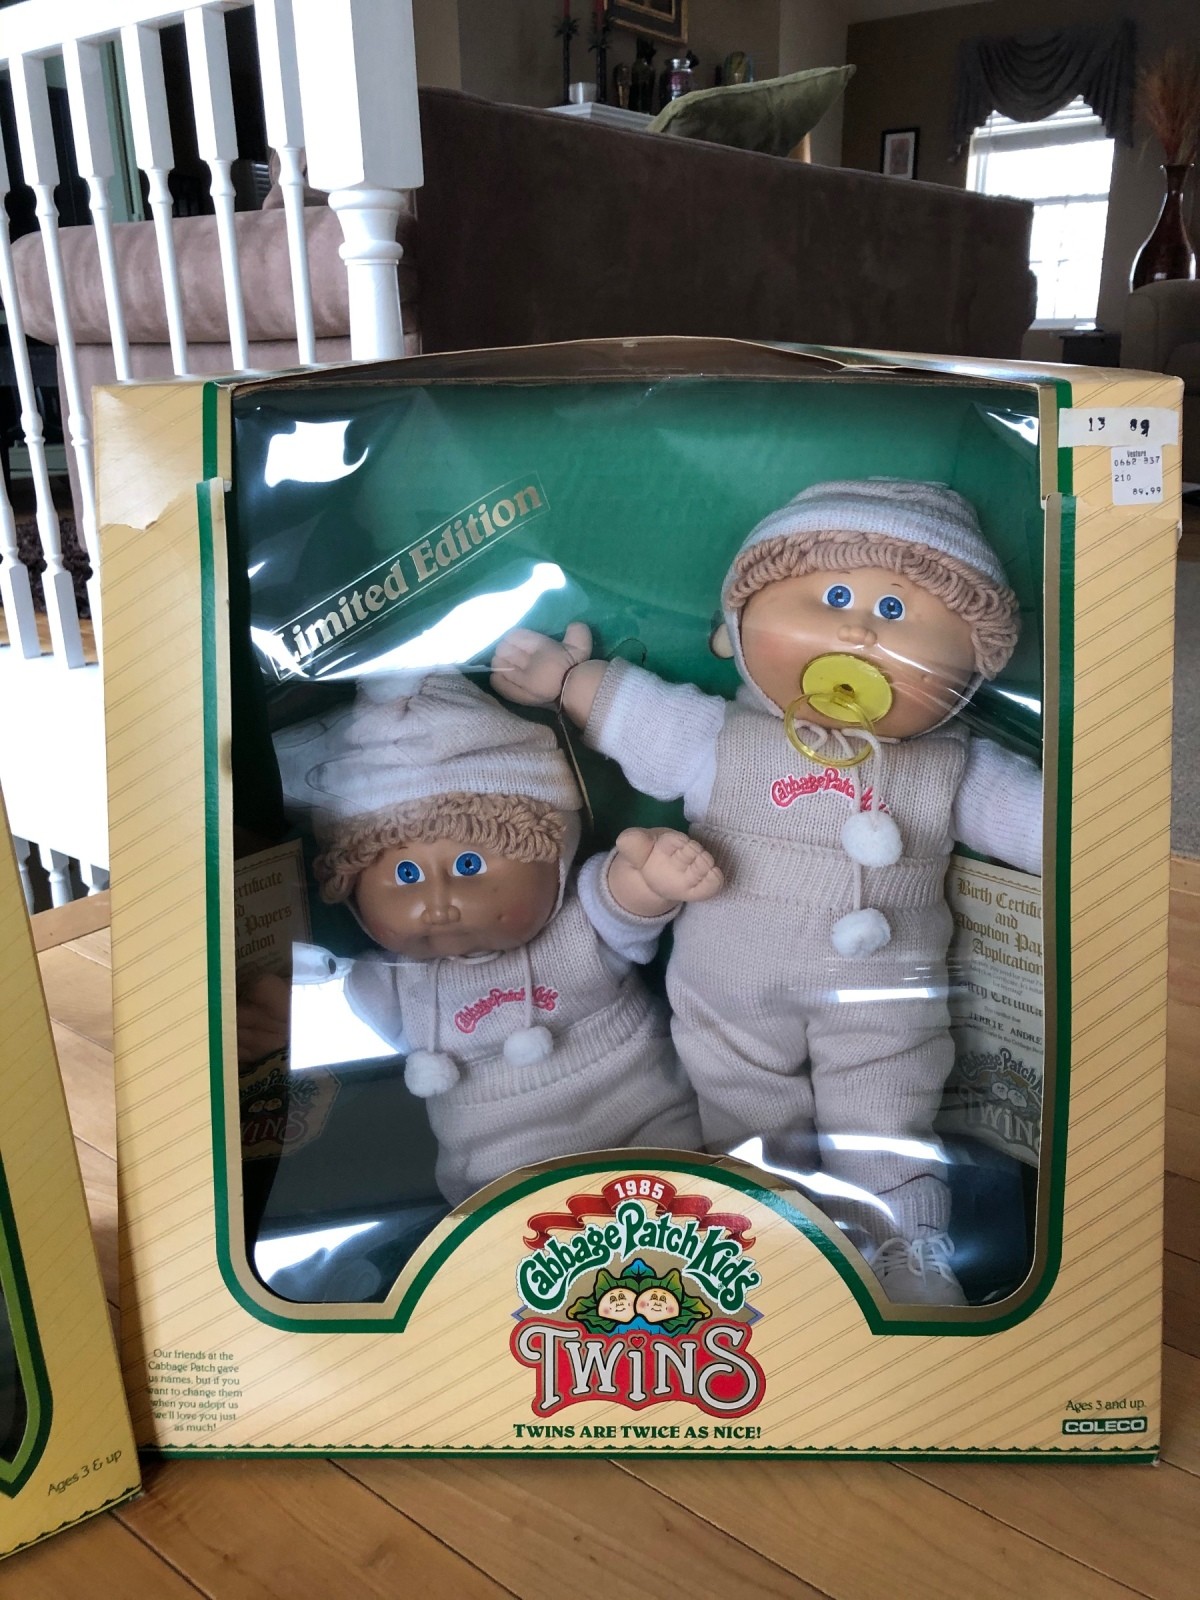 where can i sell cabbage patch dolls